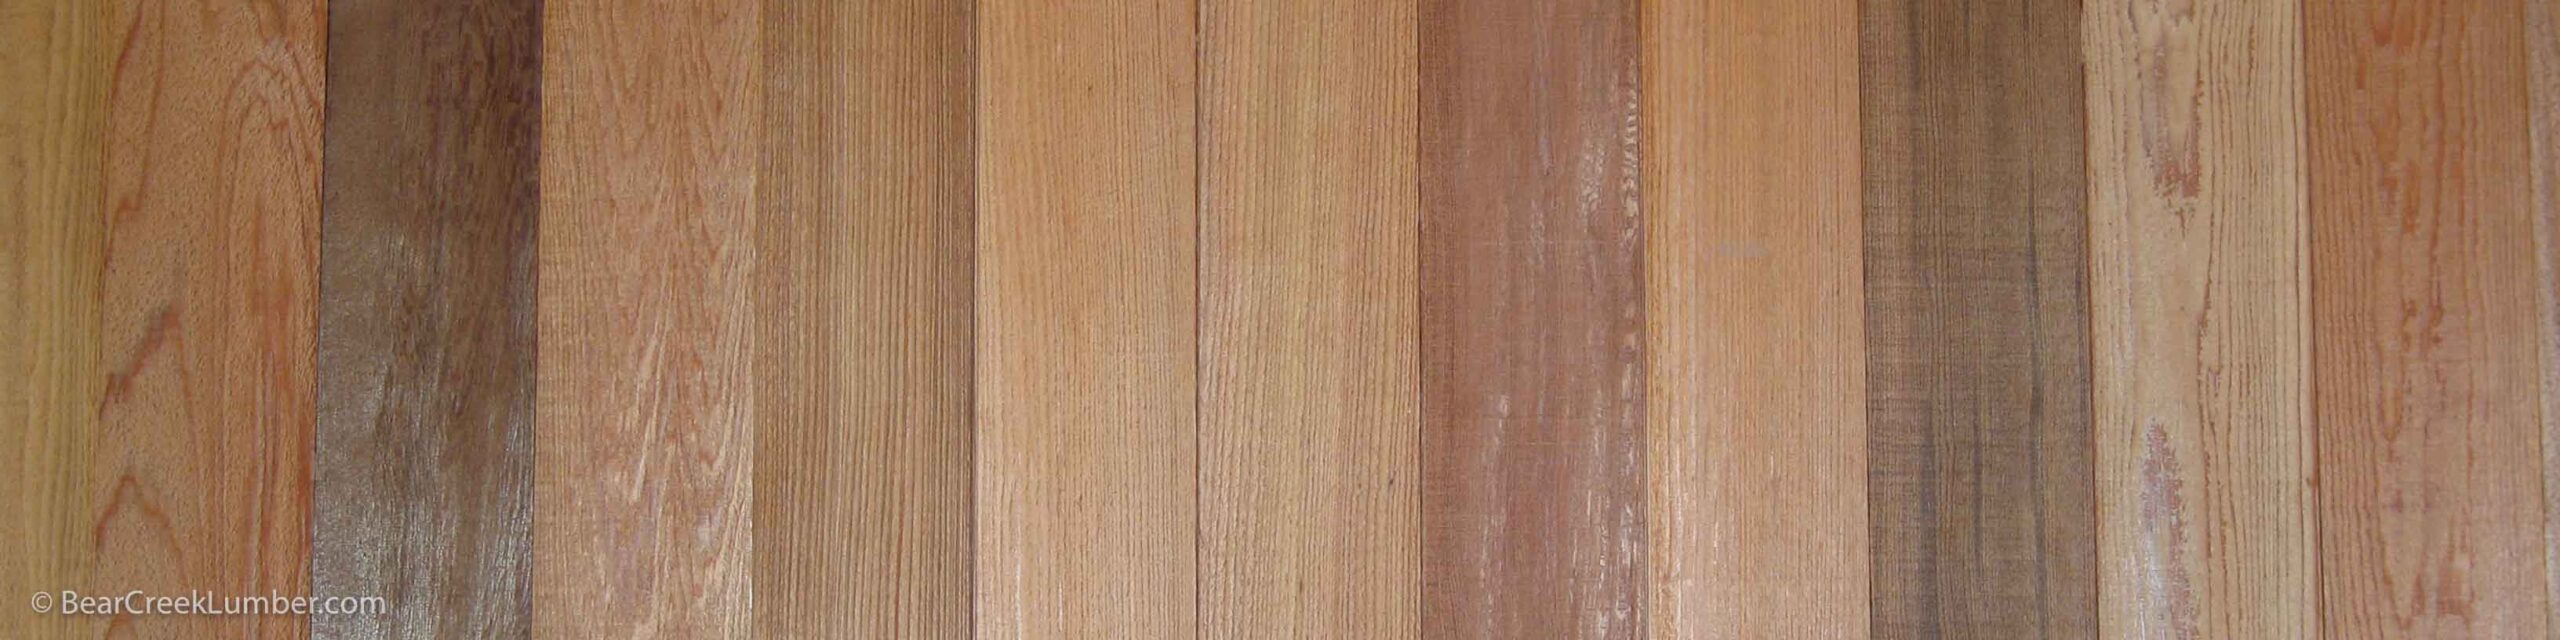 Tongue and Groove Siding